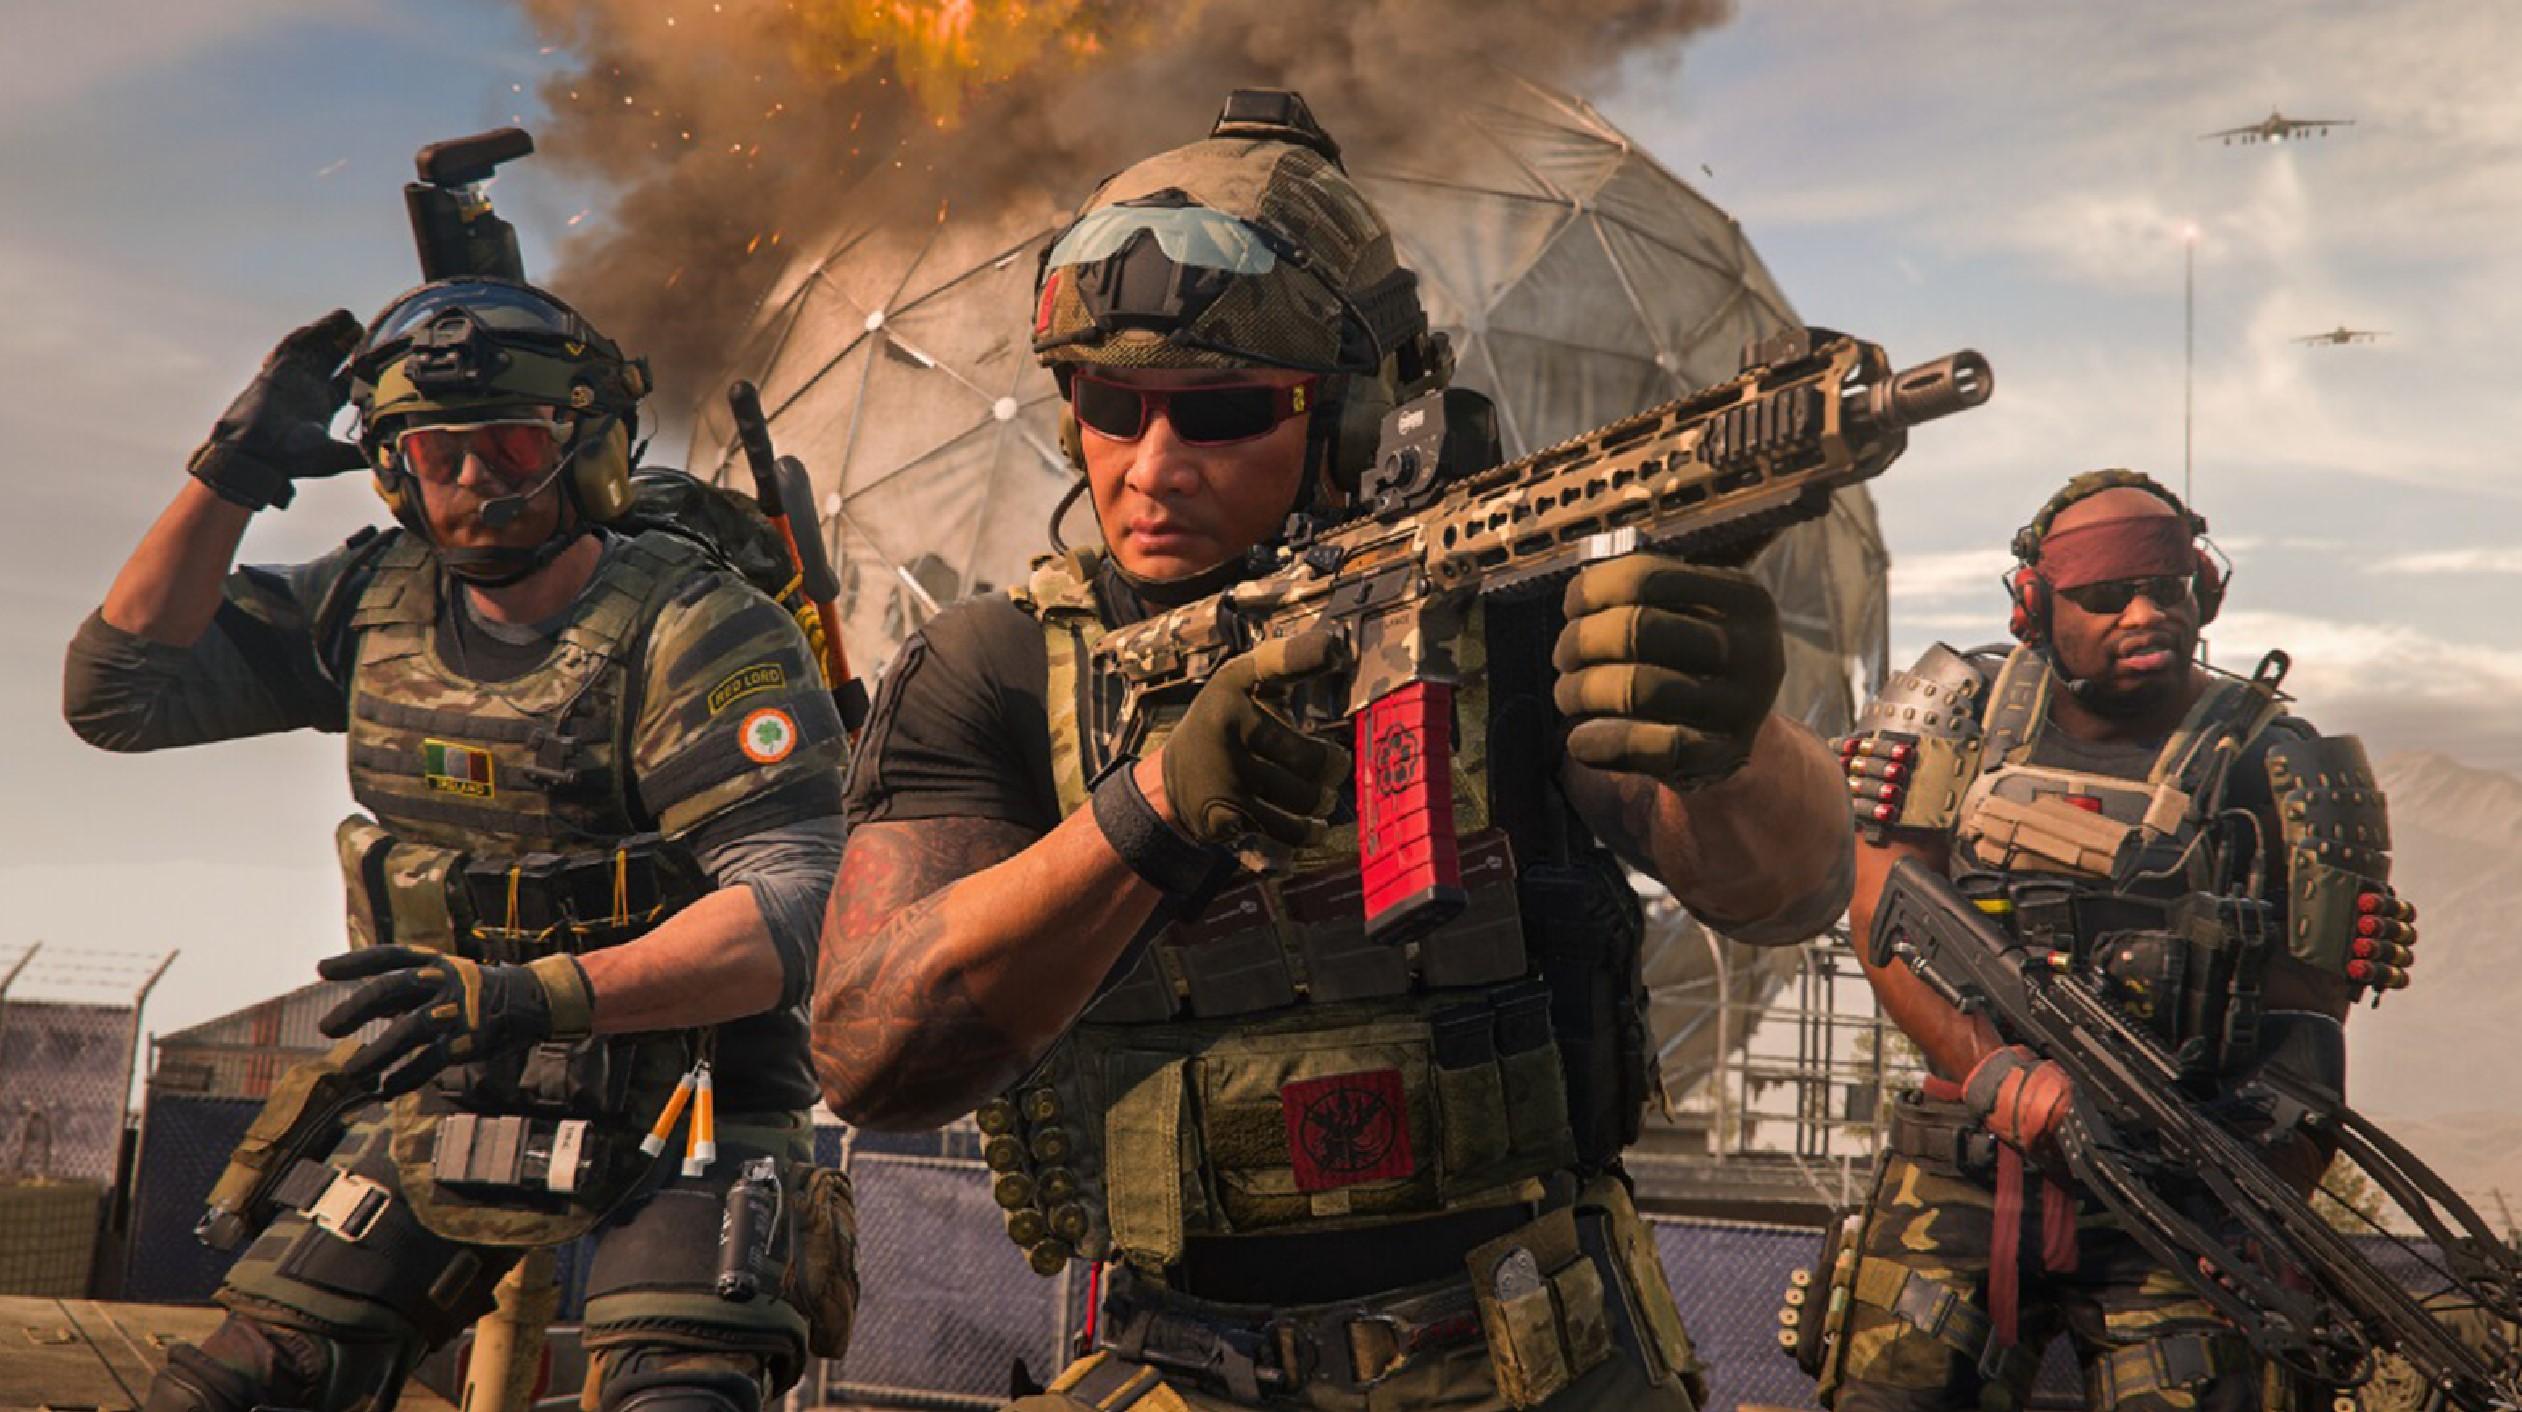 Microsoft hints at Call of Duty 's future, as series stumbles